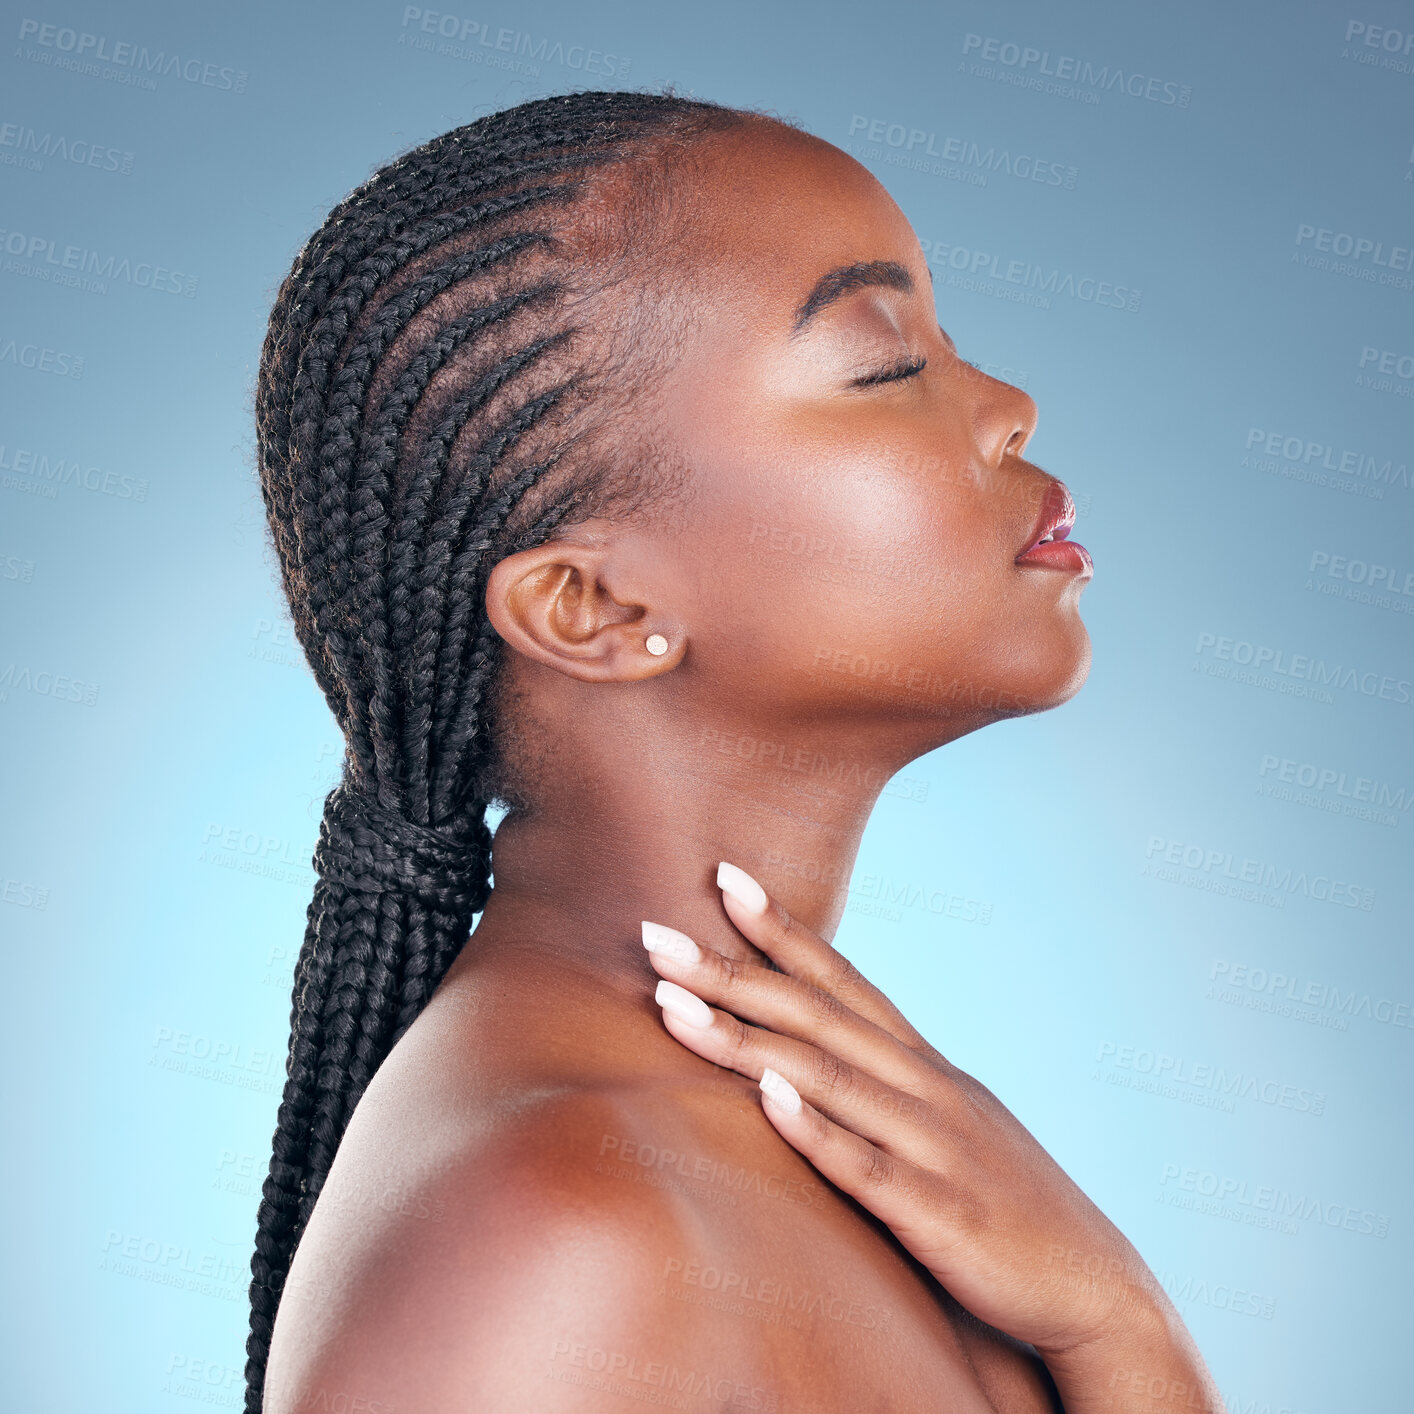 Buy stock photo Skin care, beauty and face of black woman with dermatology, makeup and manicure. Profile of African person on blue background with cosmetics, shine and facial glow with hand for soft touch in studio